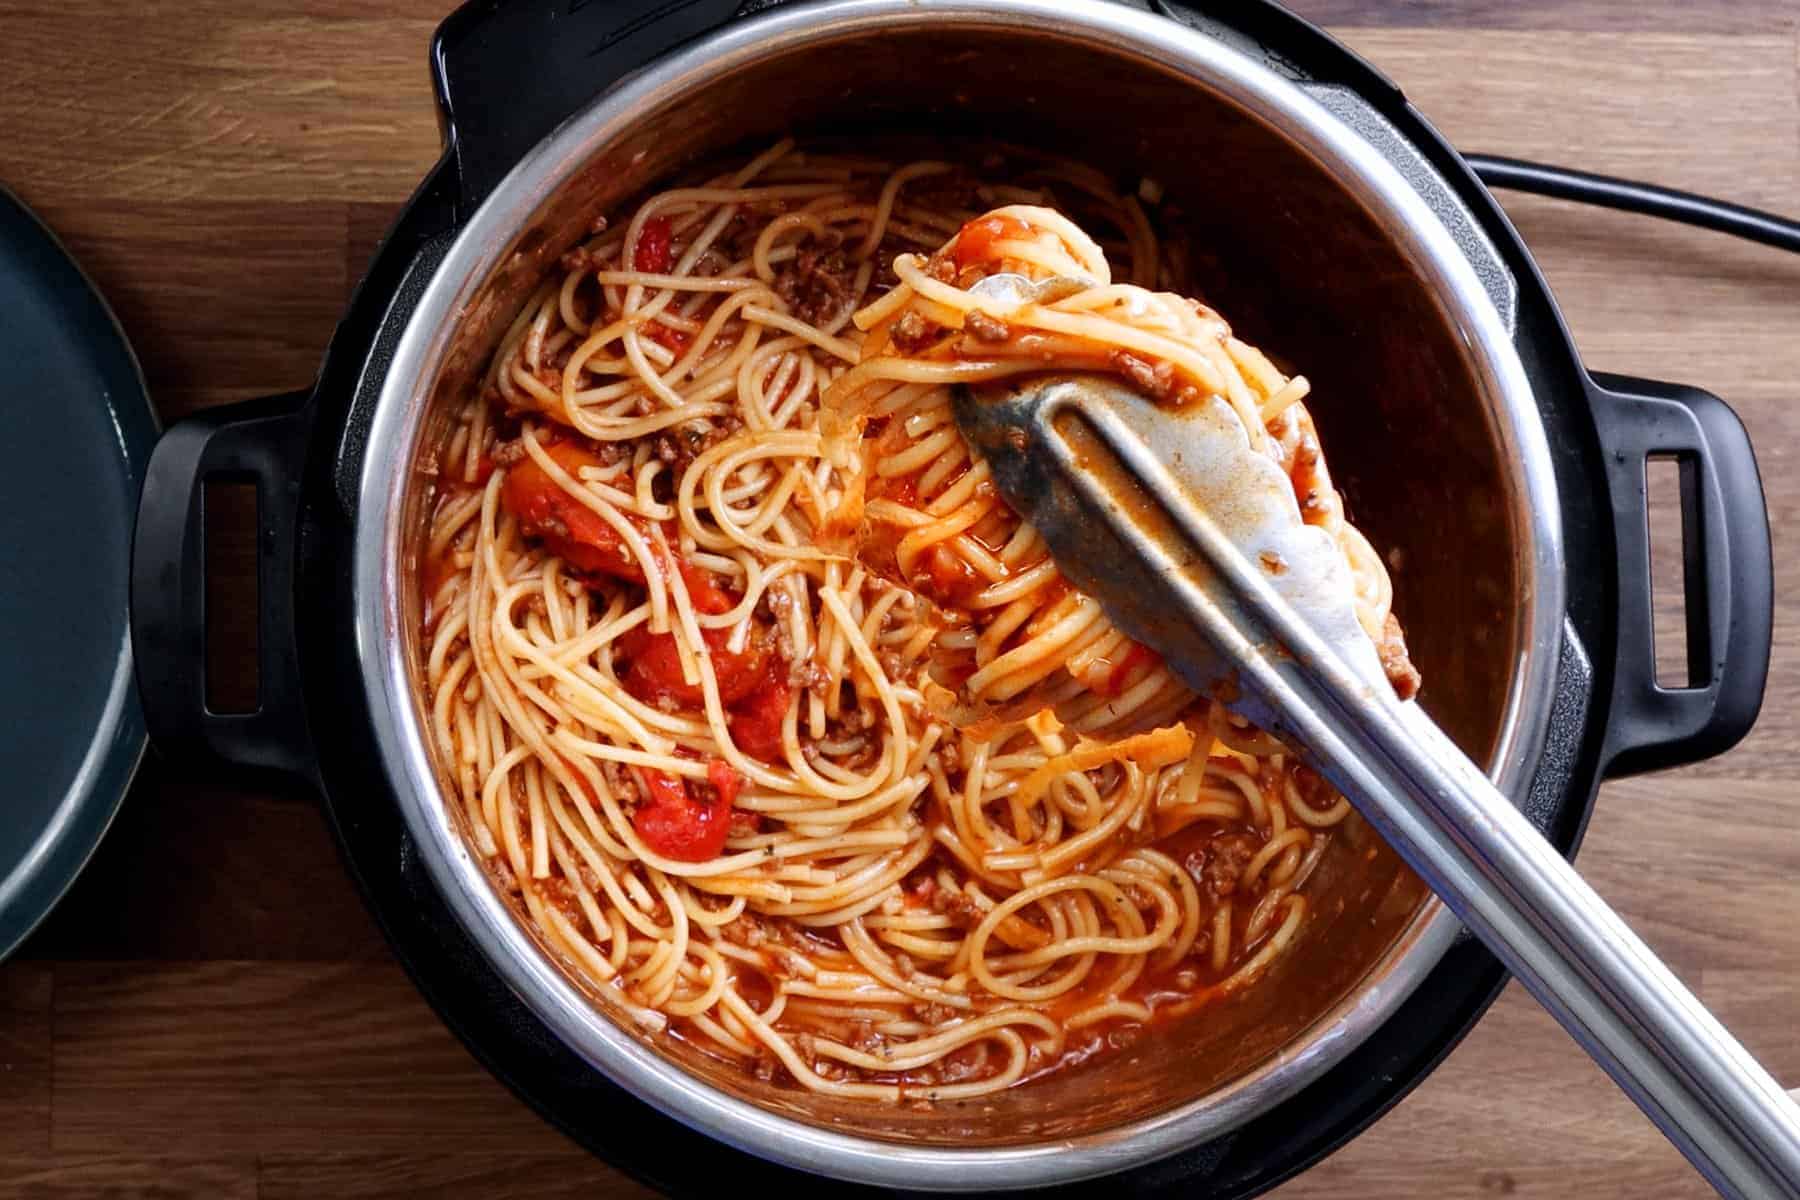 How To Cook Spaghetti In My Electric Pressure Cooker